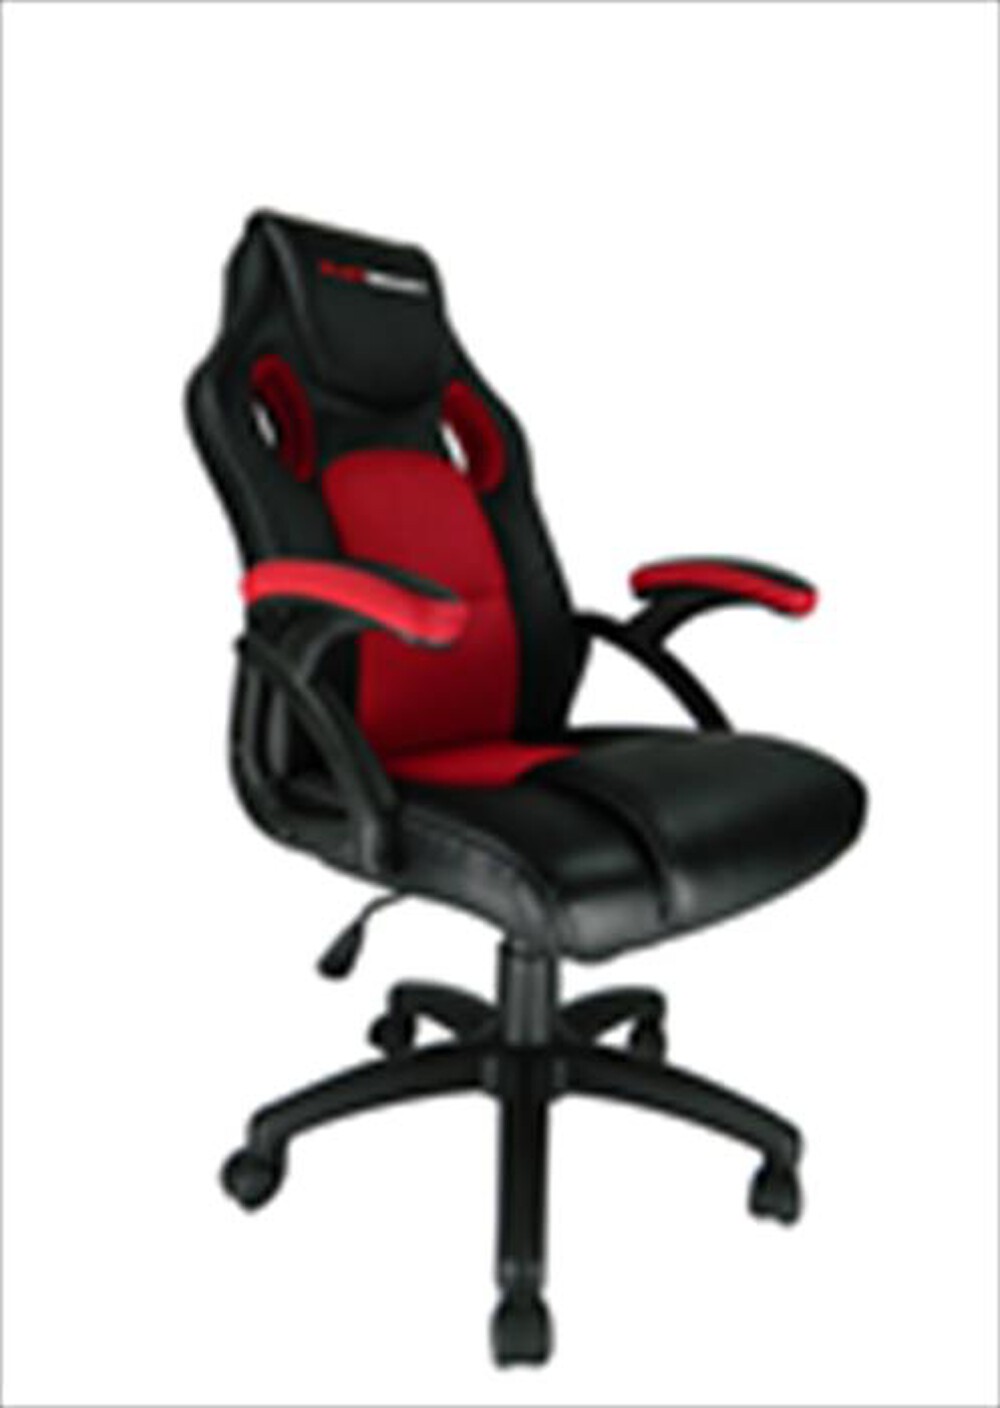 "GO!SMART - Sedia gaming PLAYSMART PC CHAIR-Rosso"